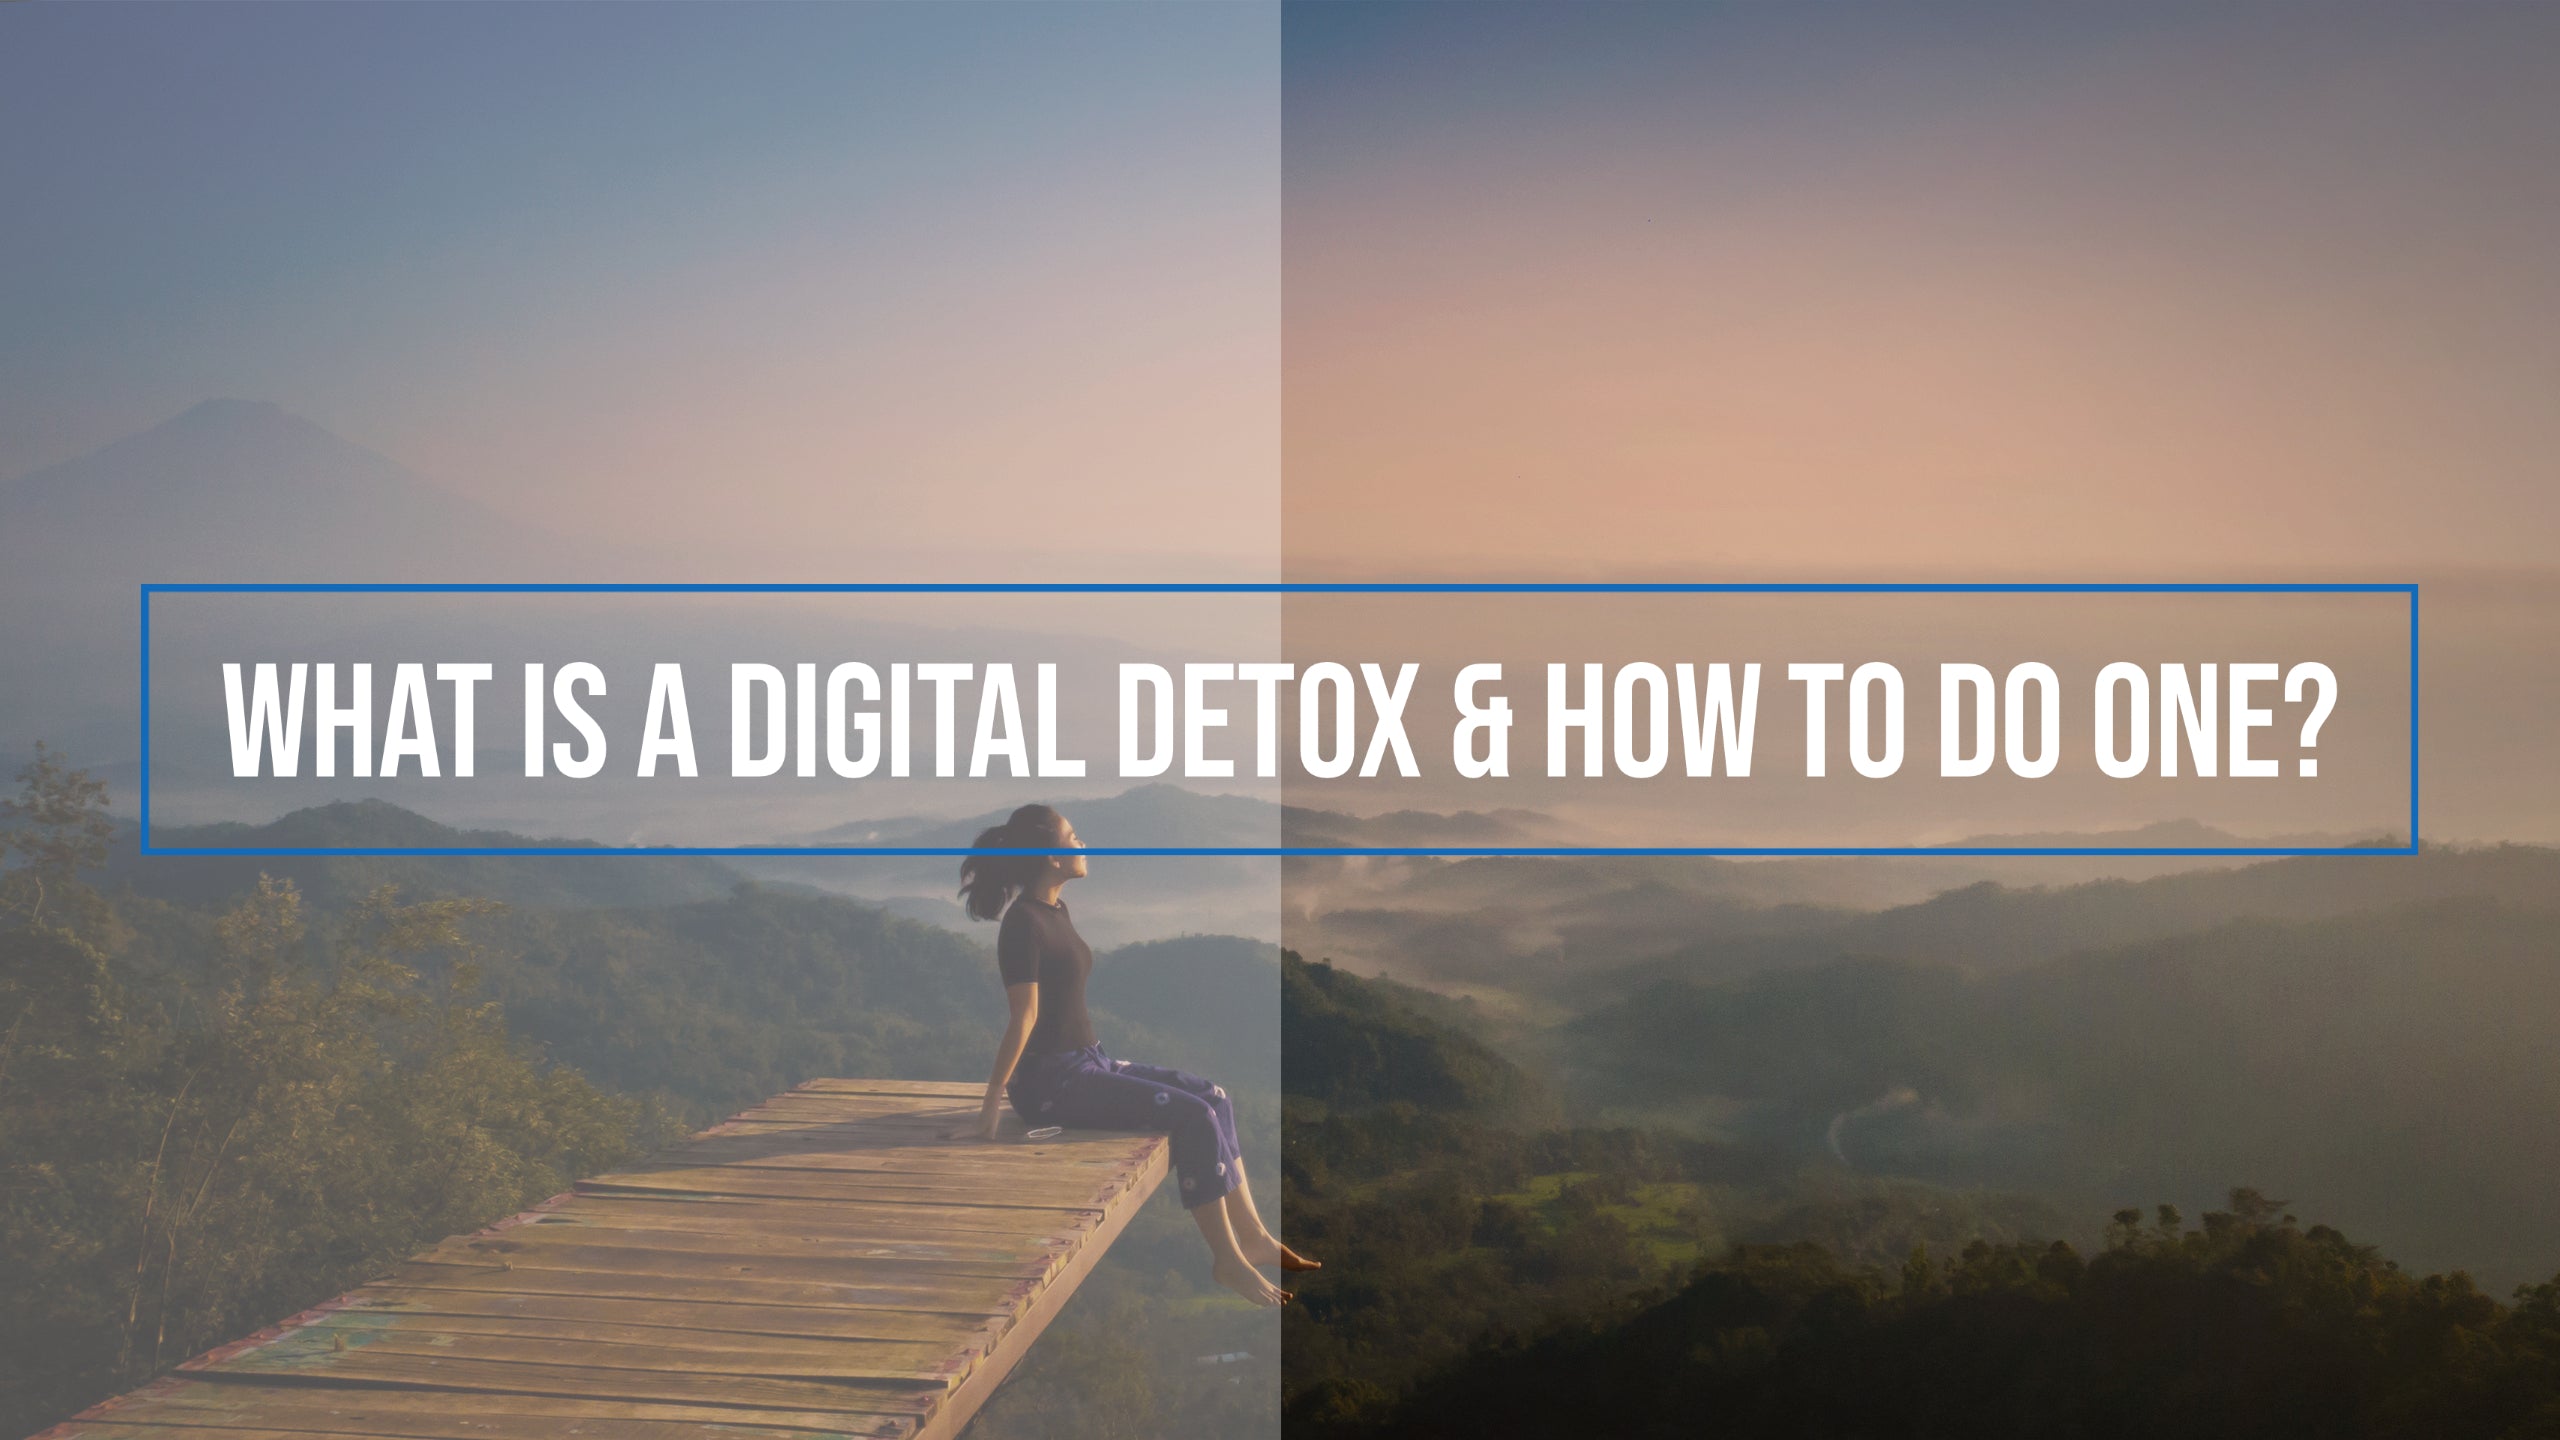 What Is A Digital Detox & How To Do One? - Complete Unity Yoga